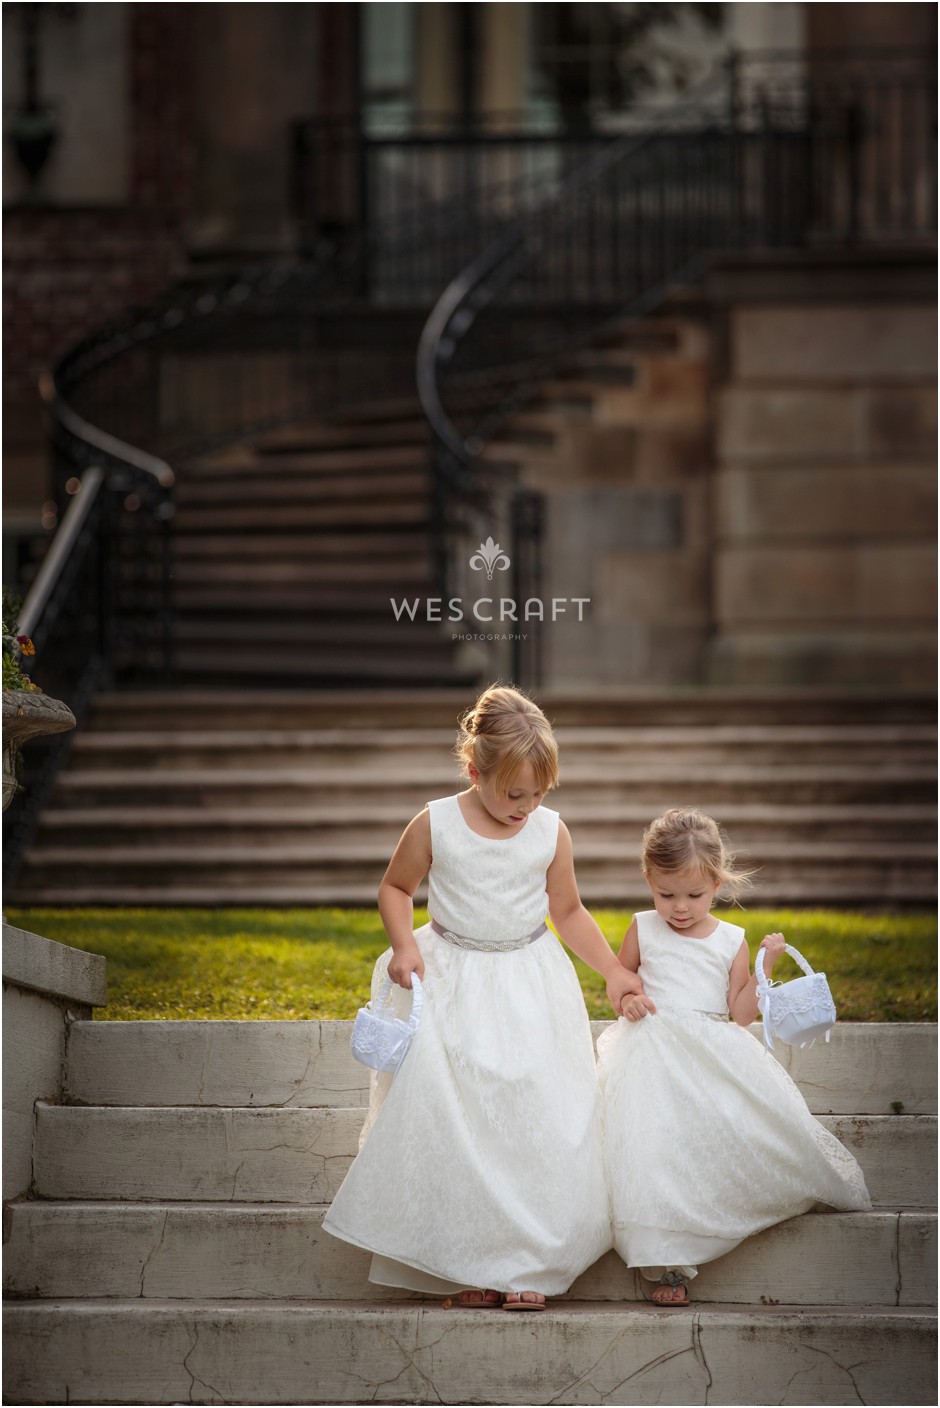 The flower girls at Kim & Dan's wedding carefully descend the east lawn staircase at Cantigny Park & Gardens in Wheaton, IL.